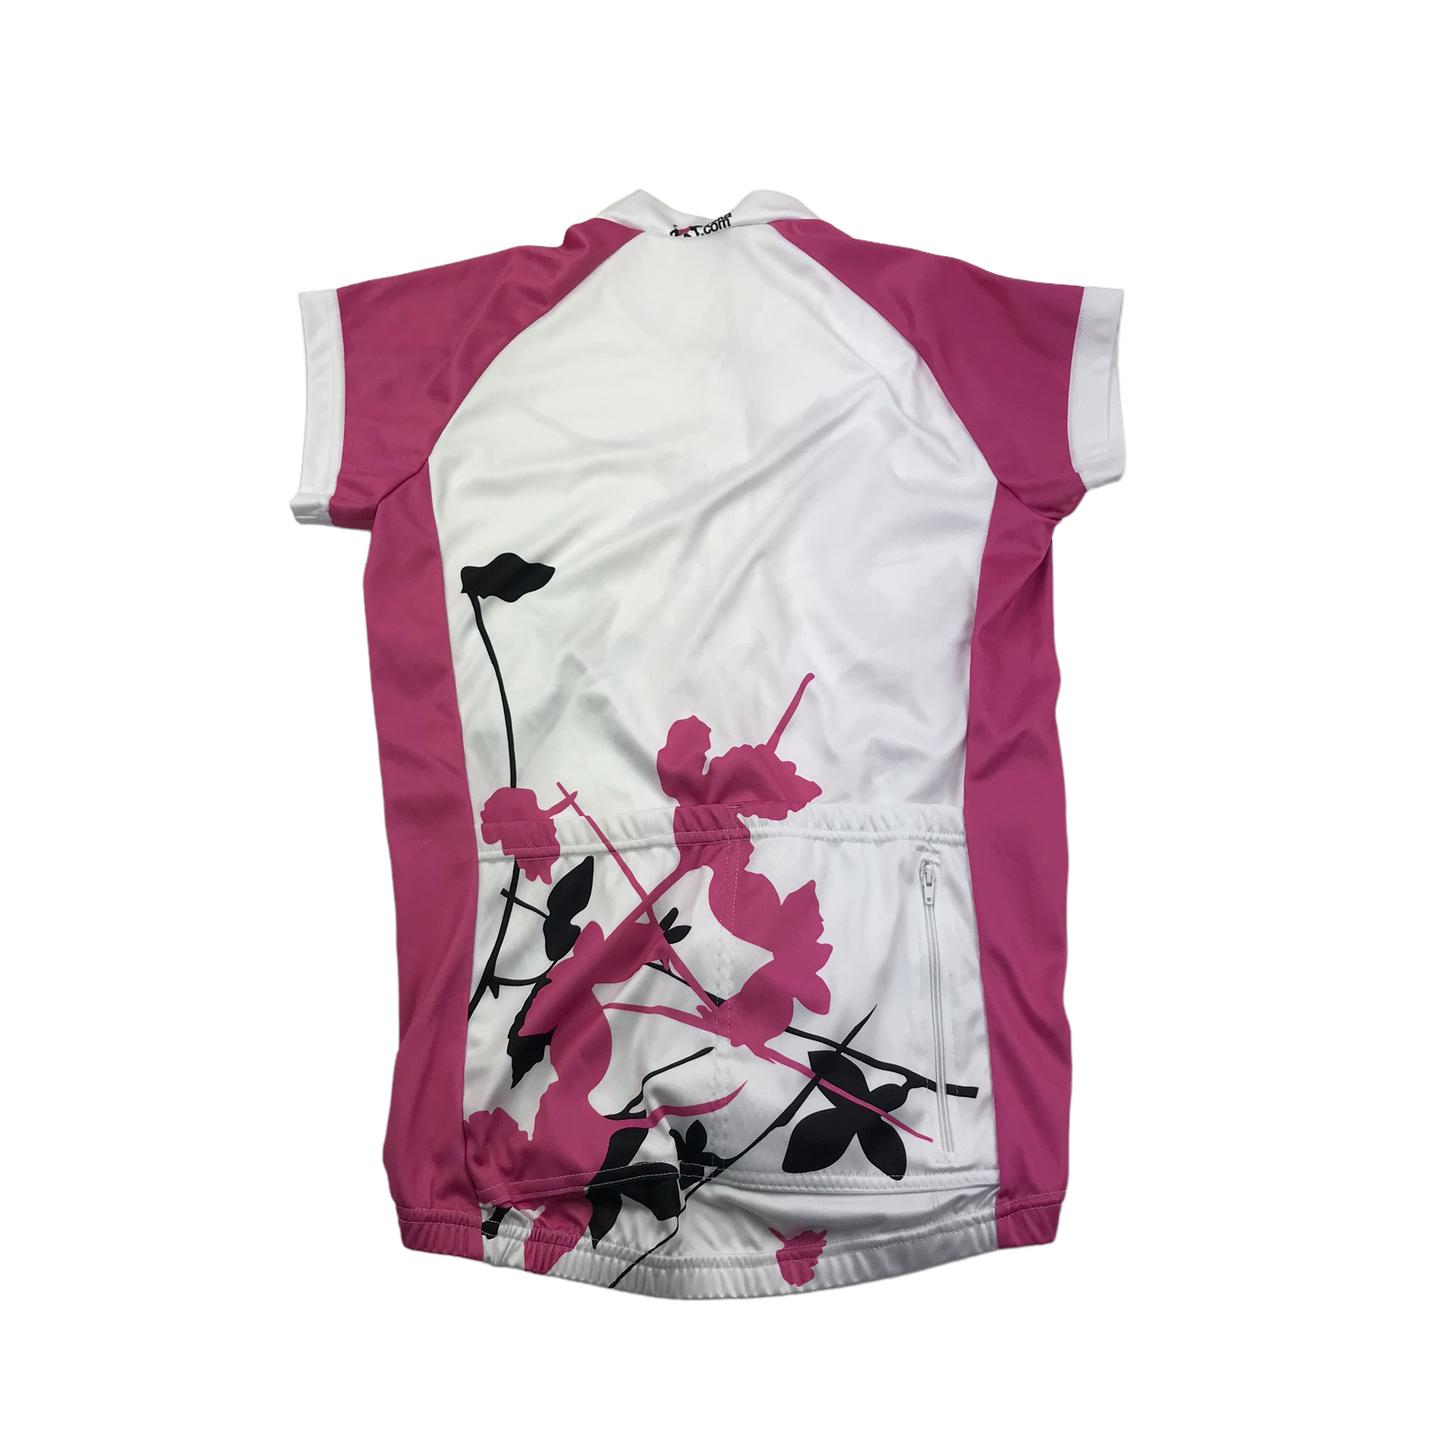 Foska White and Pink Short Sleeve Cycling Sports Top Women's Size 10